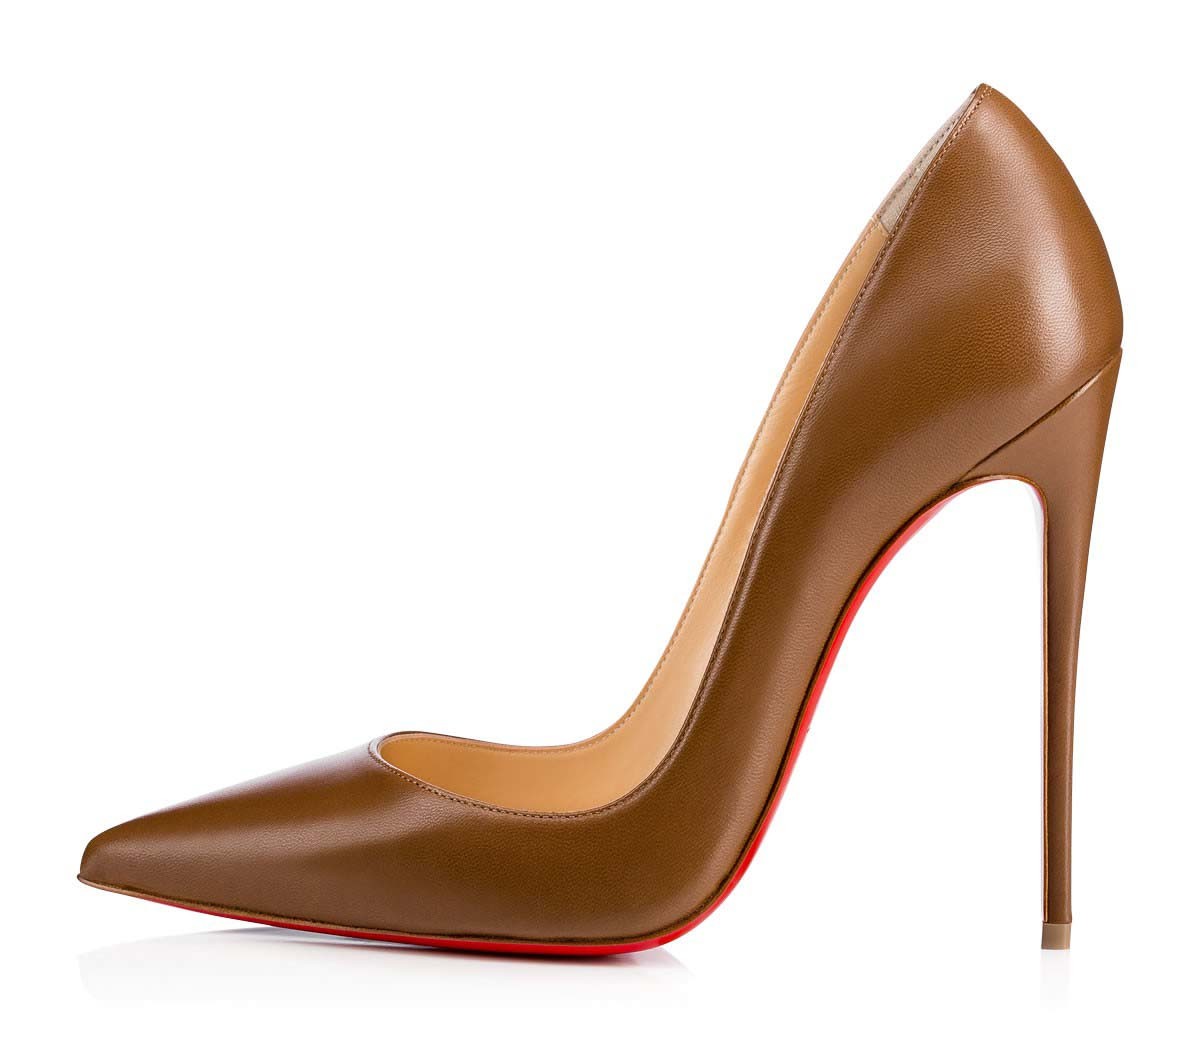 Christian Louboutin So Kate 120 mm – Shoes Post